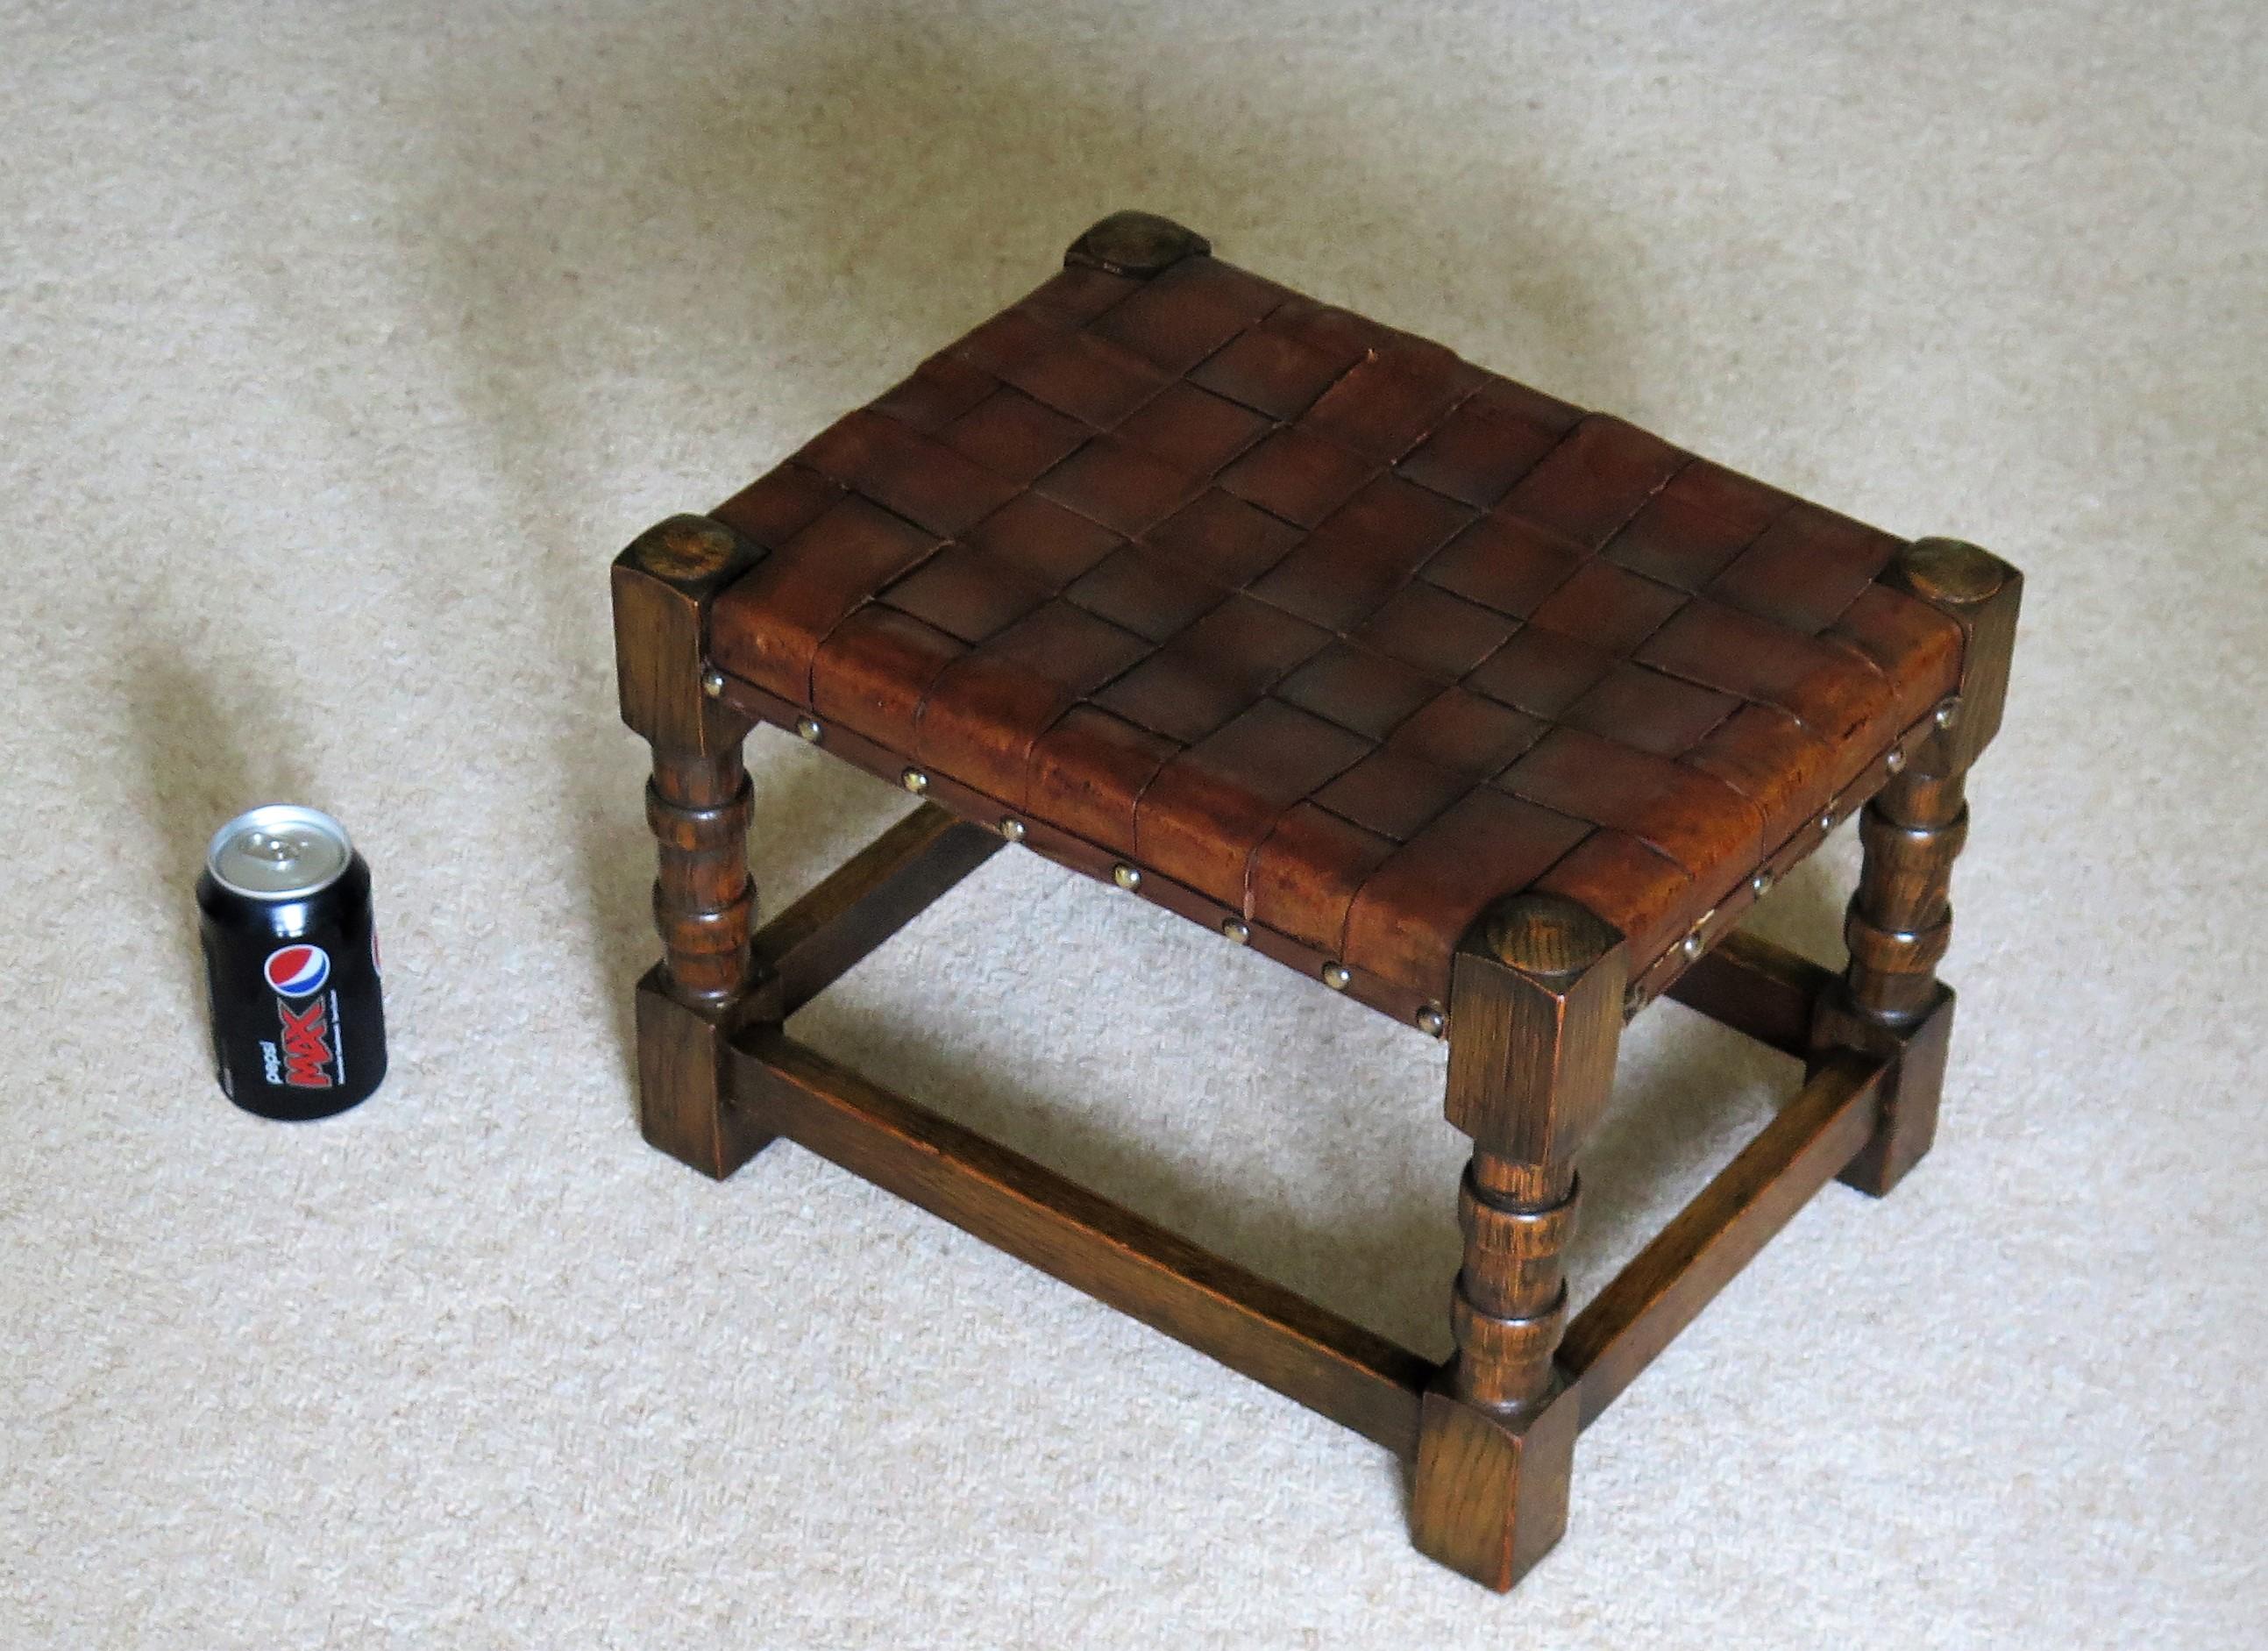 Handmade Oak Stool with Leather Strap Top, Arts & Crafts Late 19th Century For Sale 7